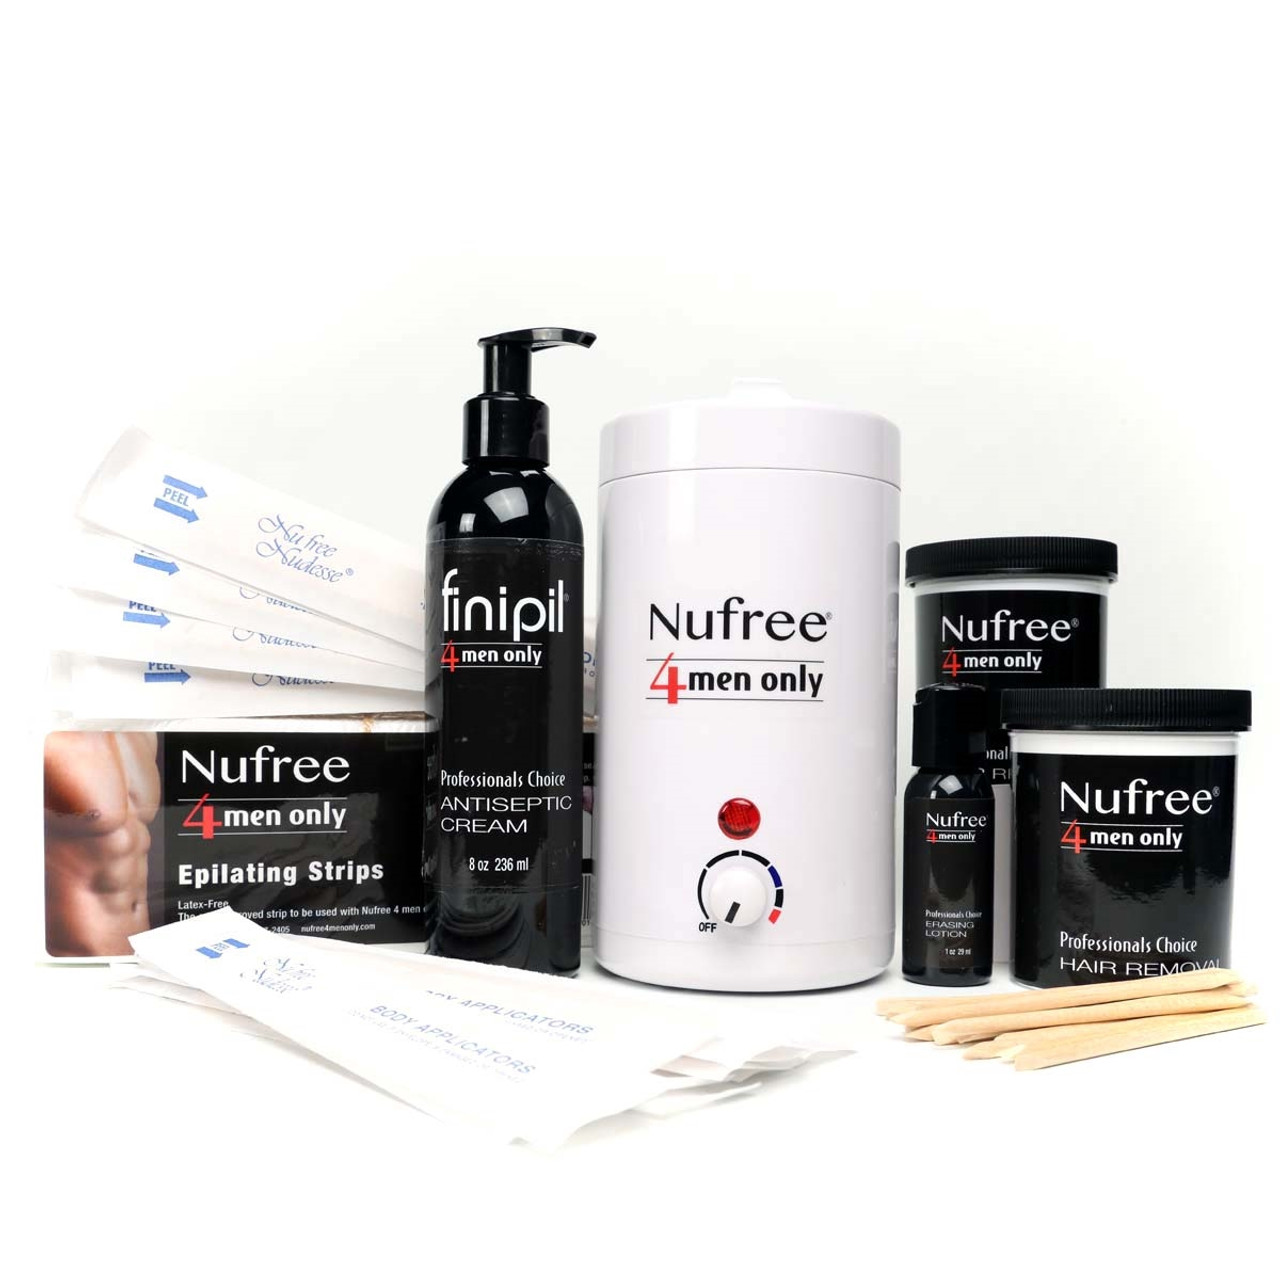 Nufree 4 men only kit for at home hair removal